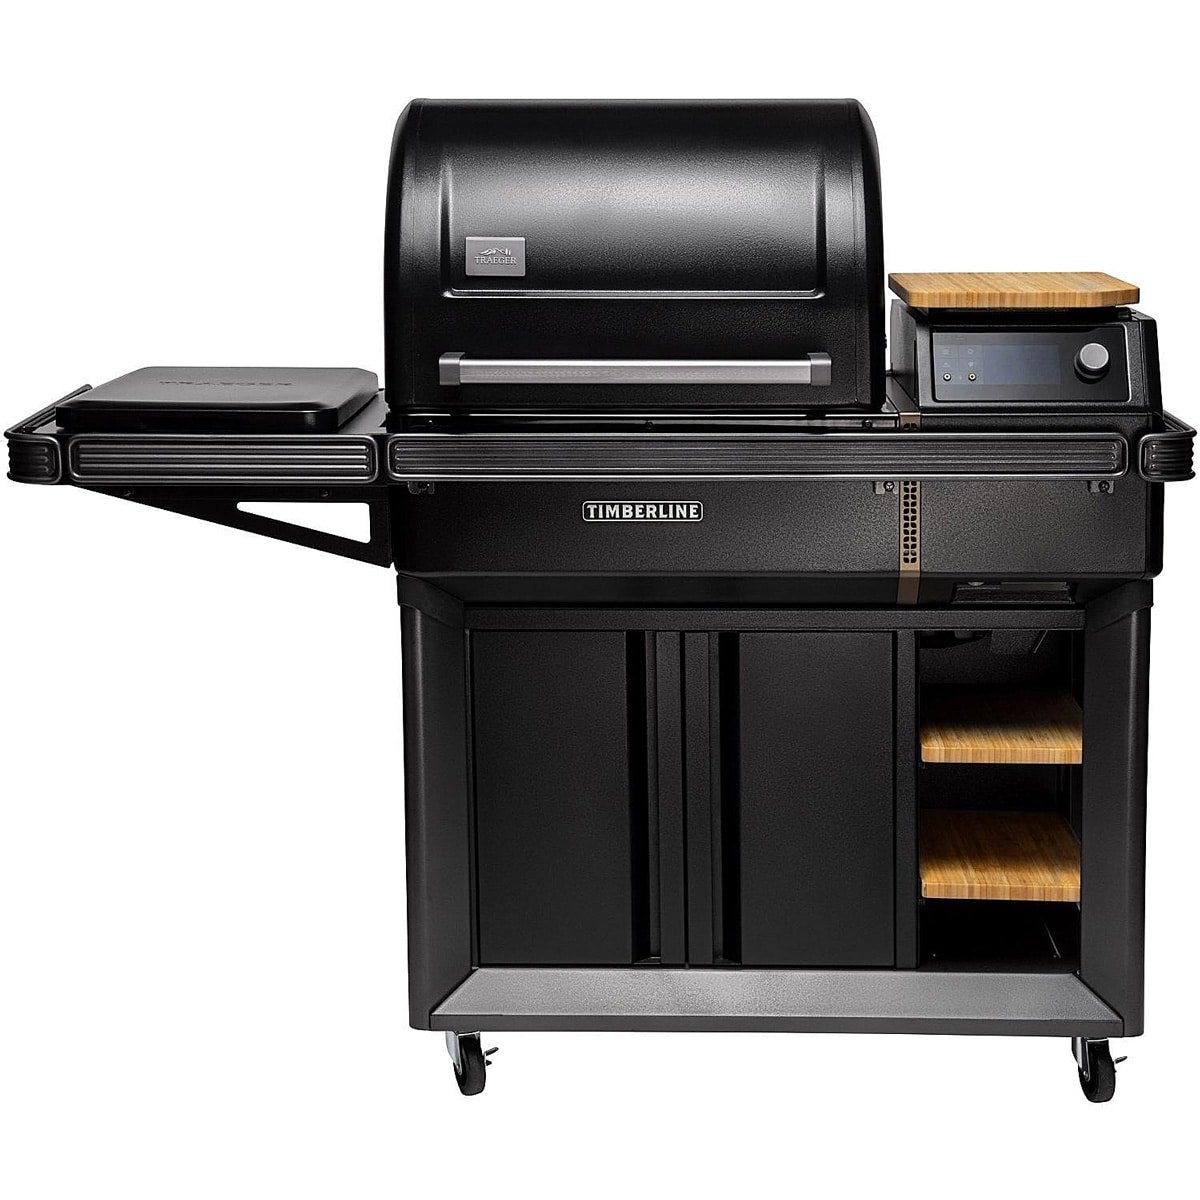 Traeger Timberline 850 Review: Shows Promise, but Its Flaws Leave it  Undercooked